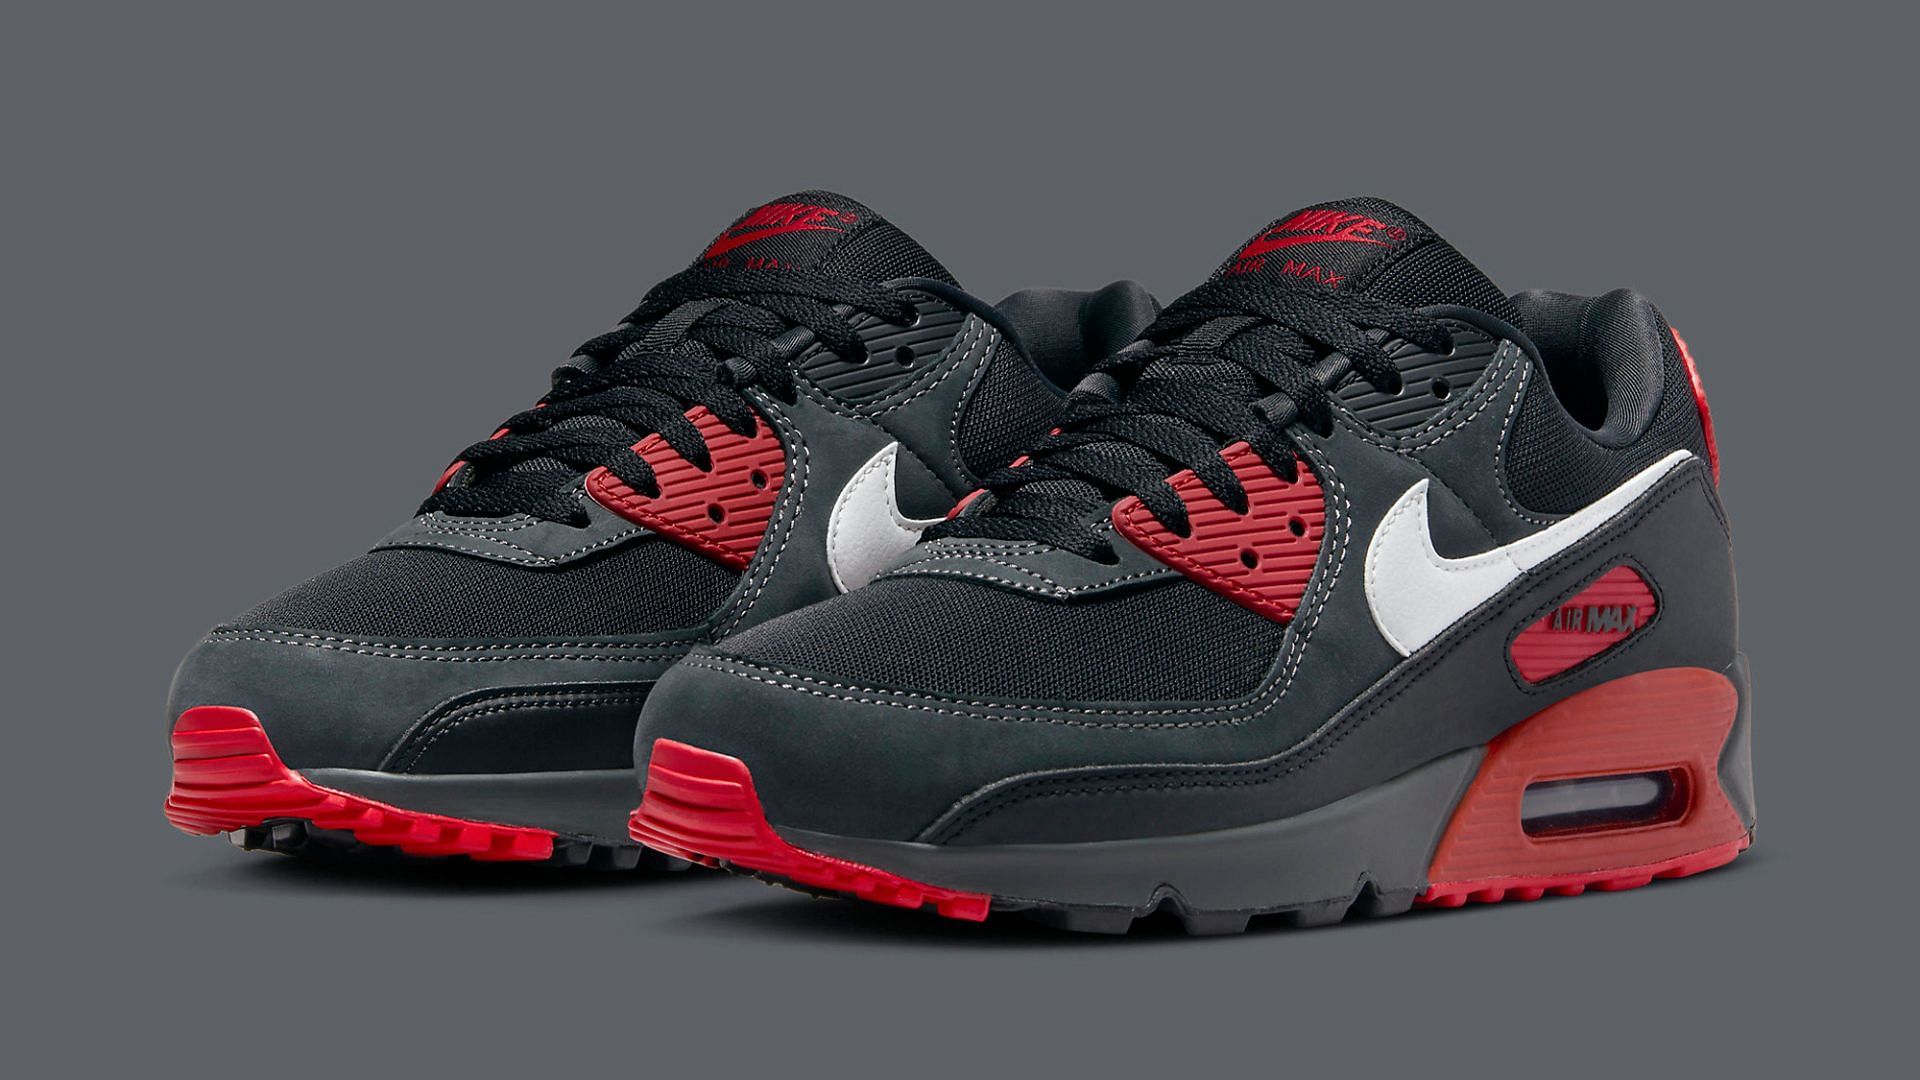 Nike Air Max 90 Anthracite shoes (Image via House of Heat)